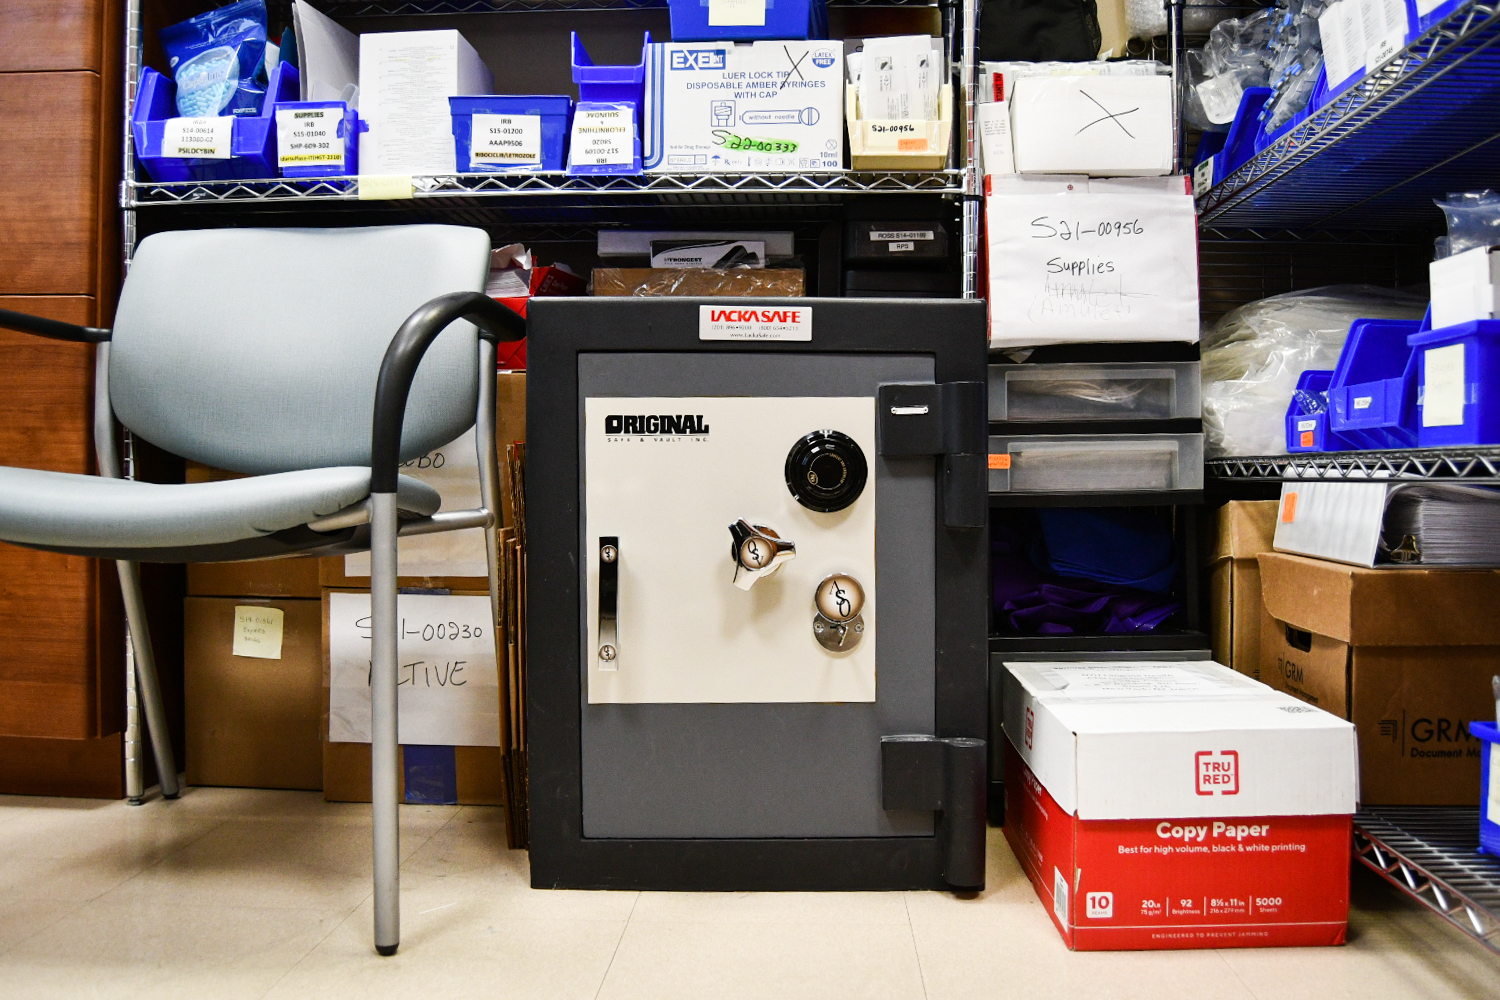 A safe placed next to a chair and a paper box on the ground with shelves of miscellaneous items in the background.